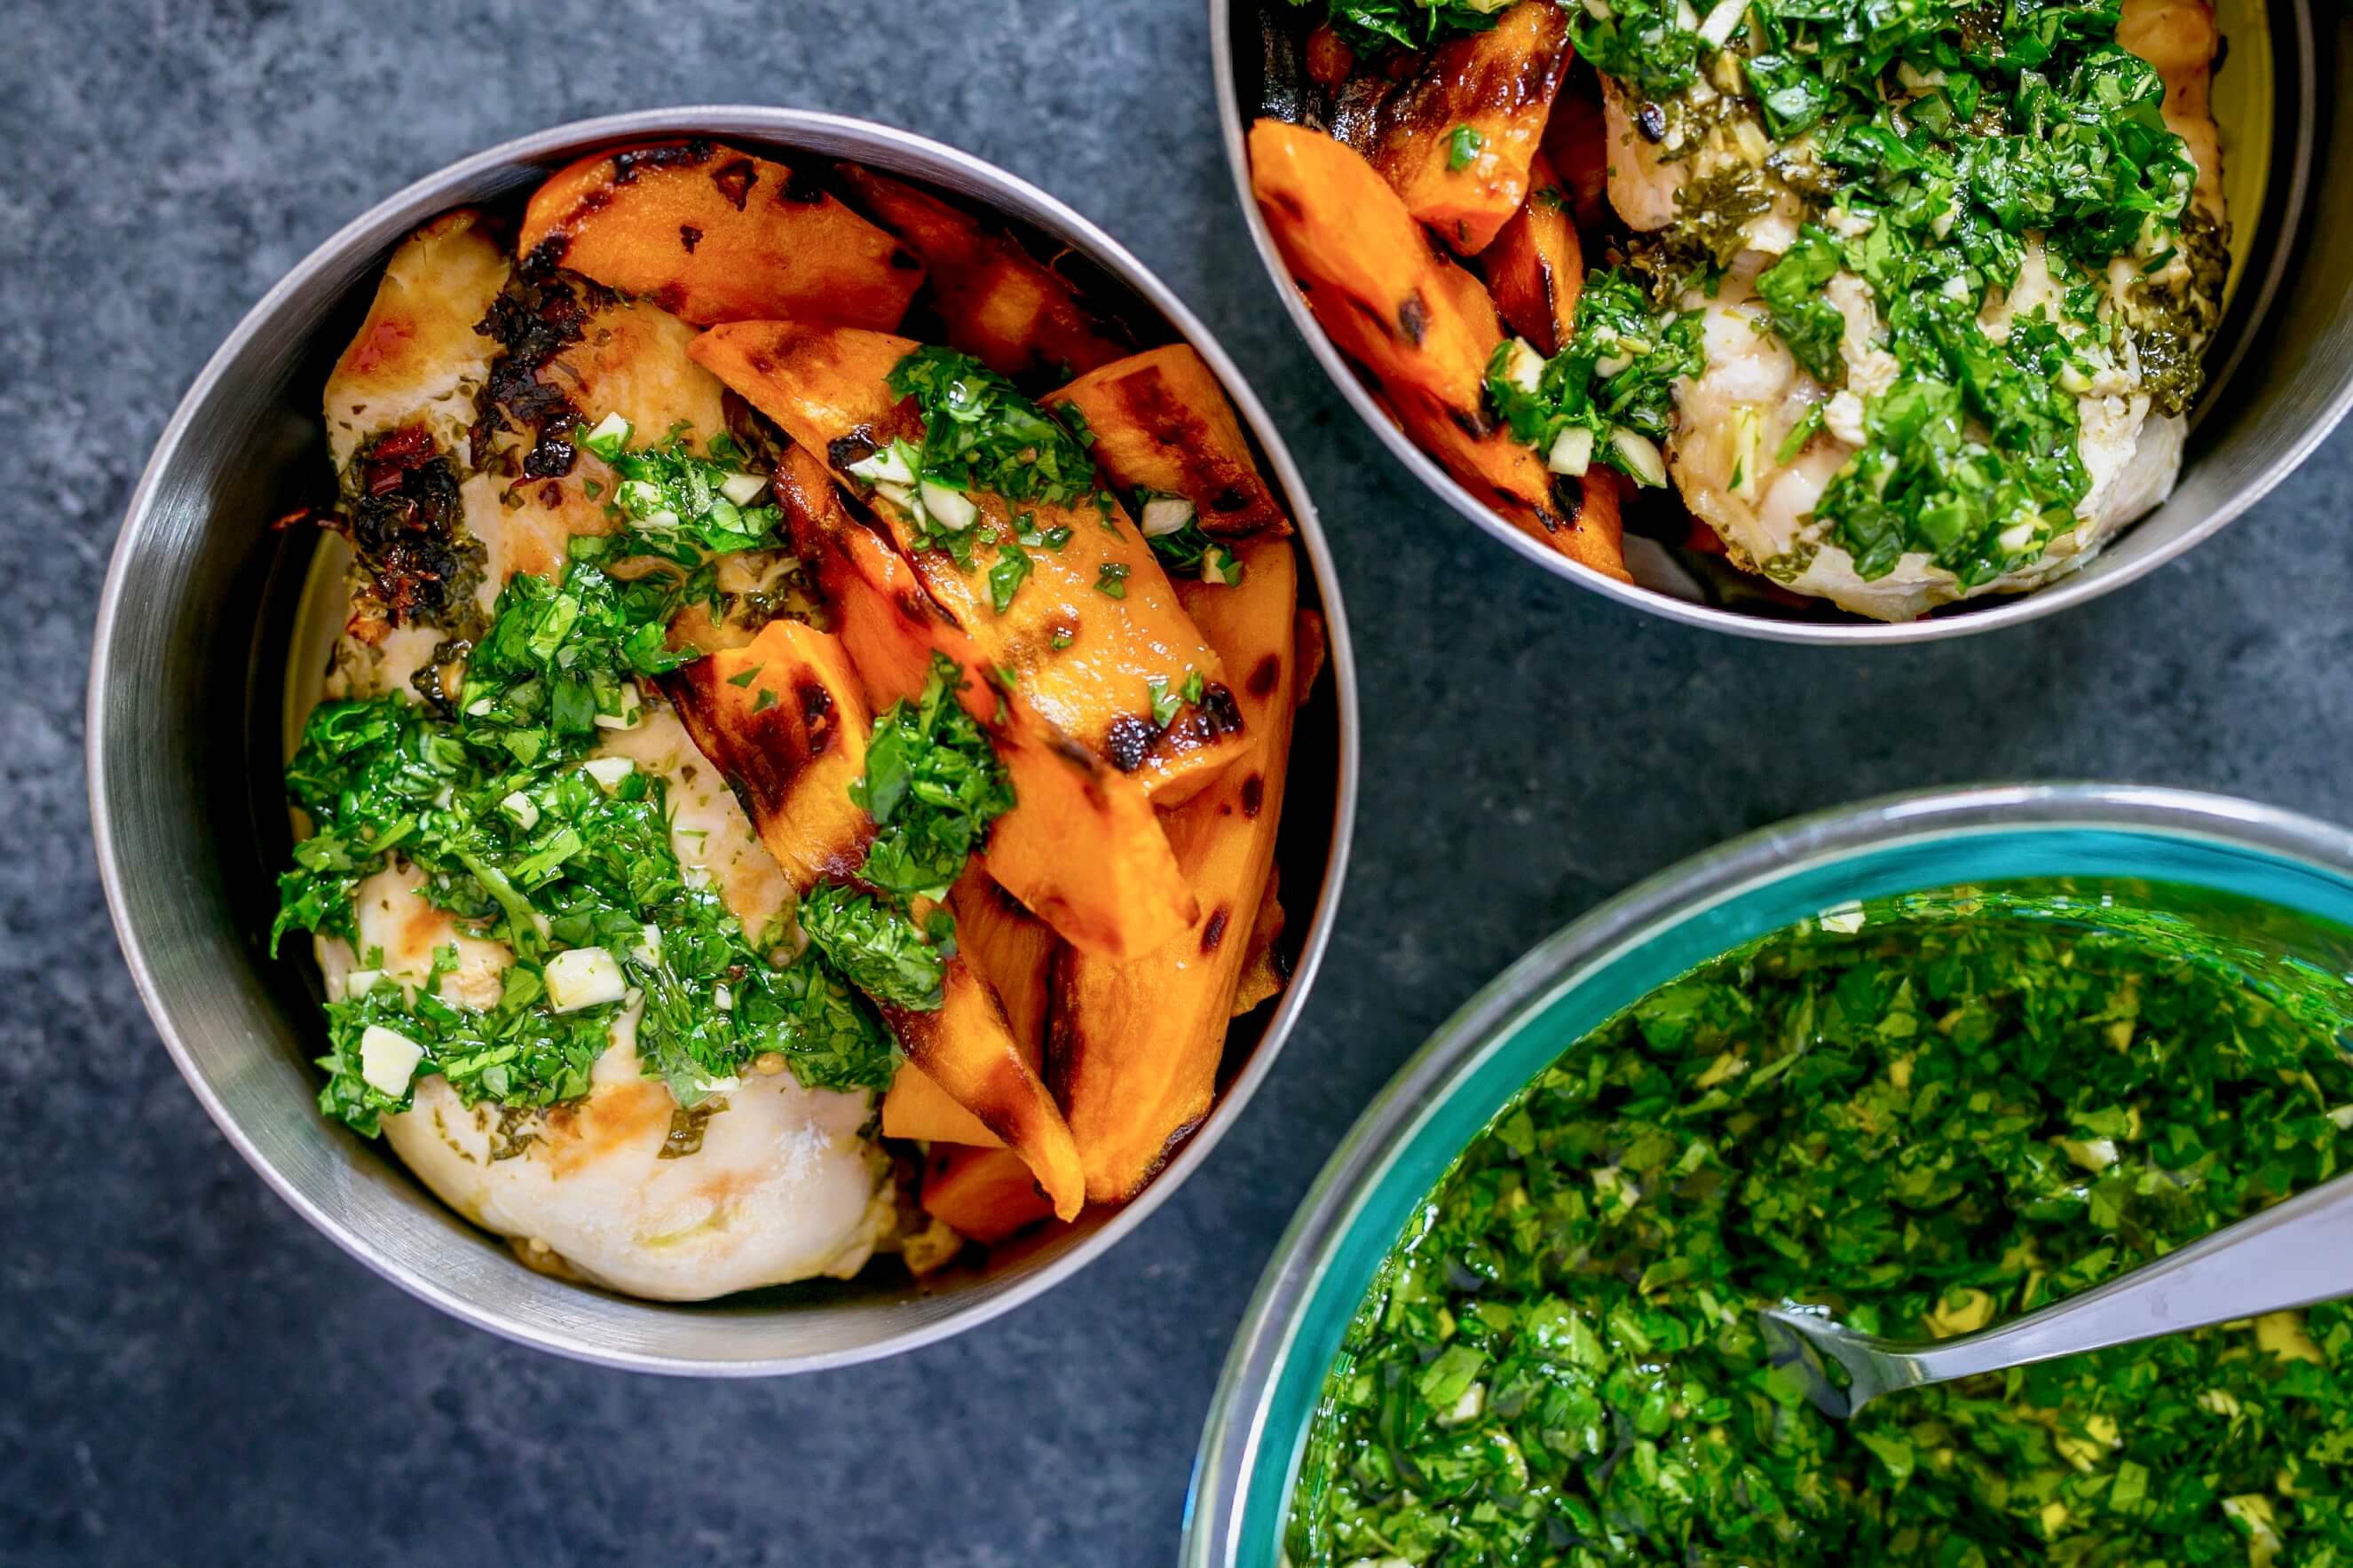 20 Summer-Inspired Meals Your Clients Will Love: BBQ Chimichurri Chicken with Sweet Potato Wedges